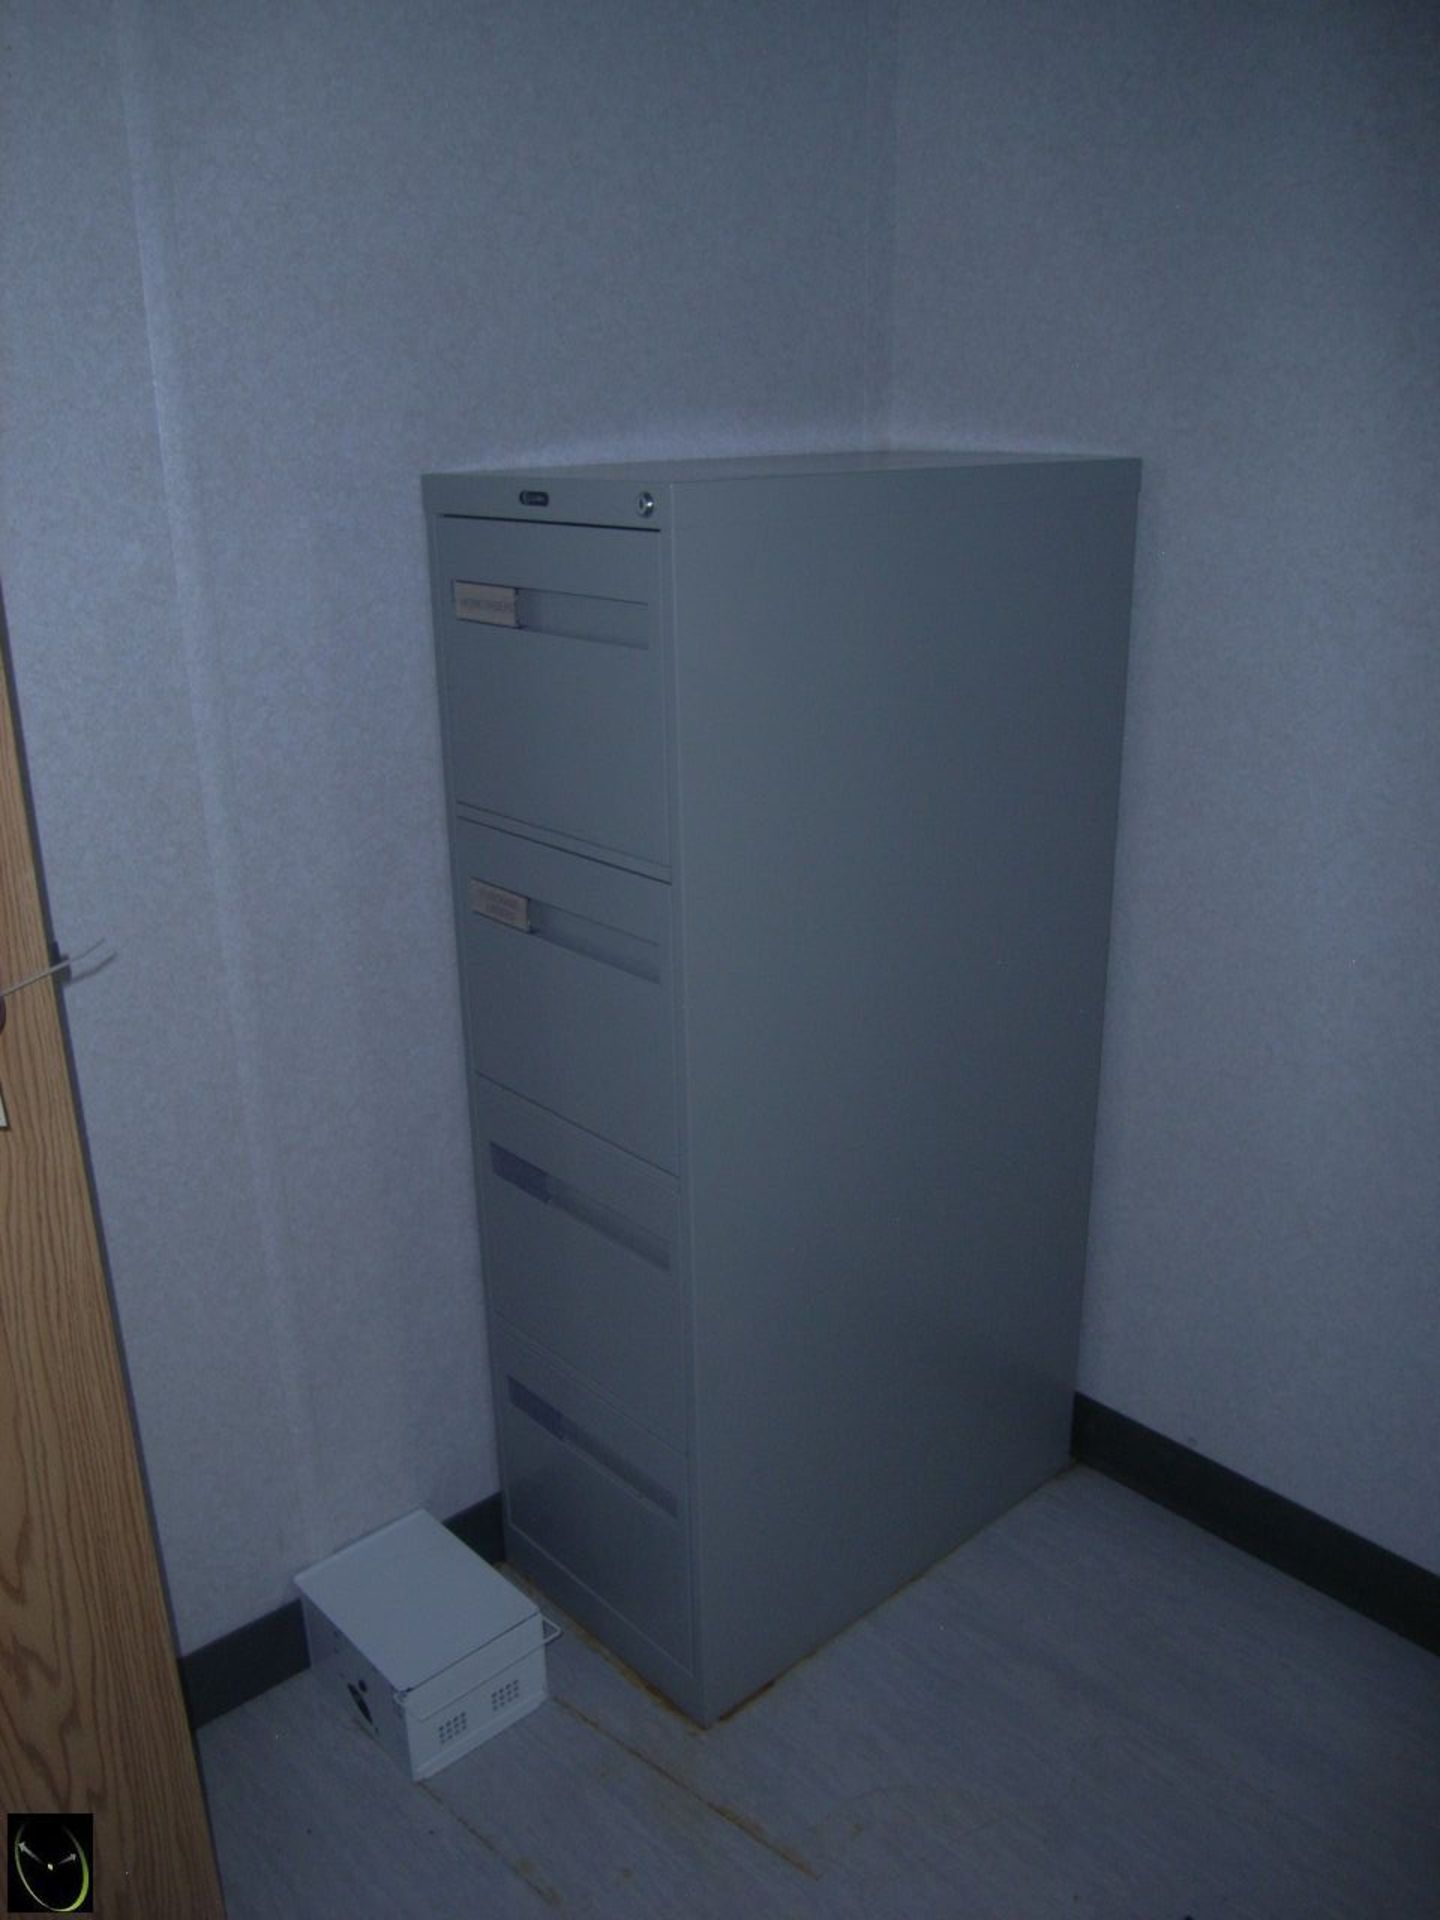 Two Pedestal Desk w/ Misc. On Top, Four Drawer Letter Size Filing Cabinet. - Image 4 of 4